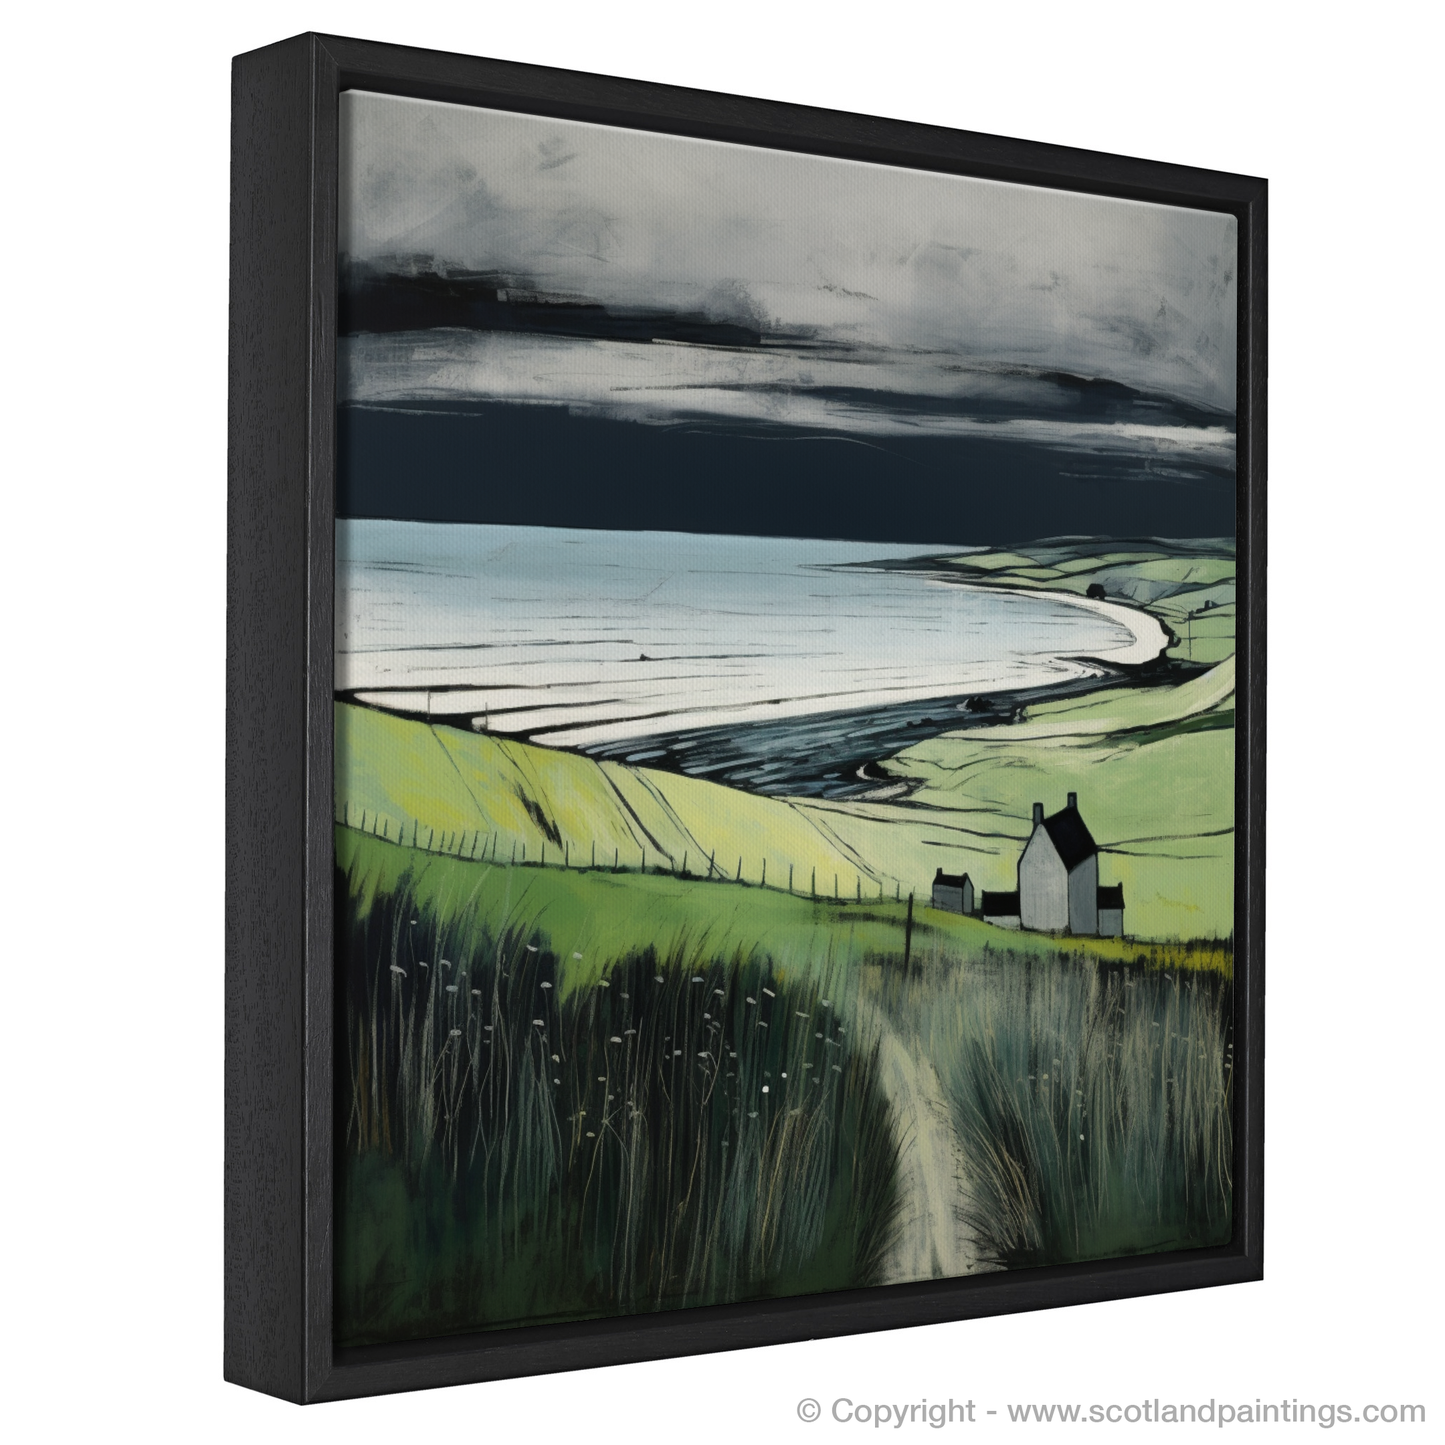 Painting and Art Print of Lunan Bay, Angus entitled "Lunan Bay Reverie: An Illustrative Expressionist Journey".